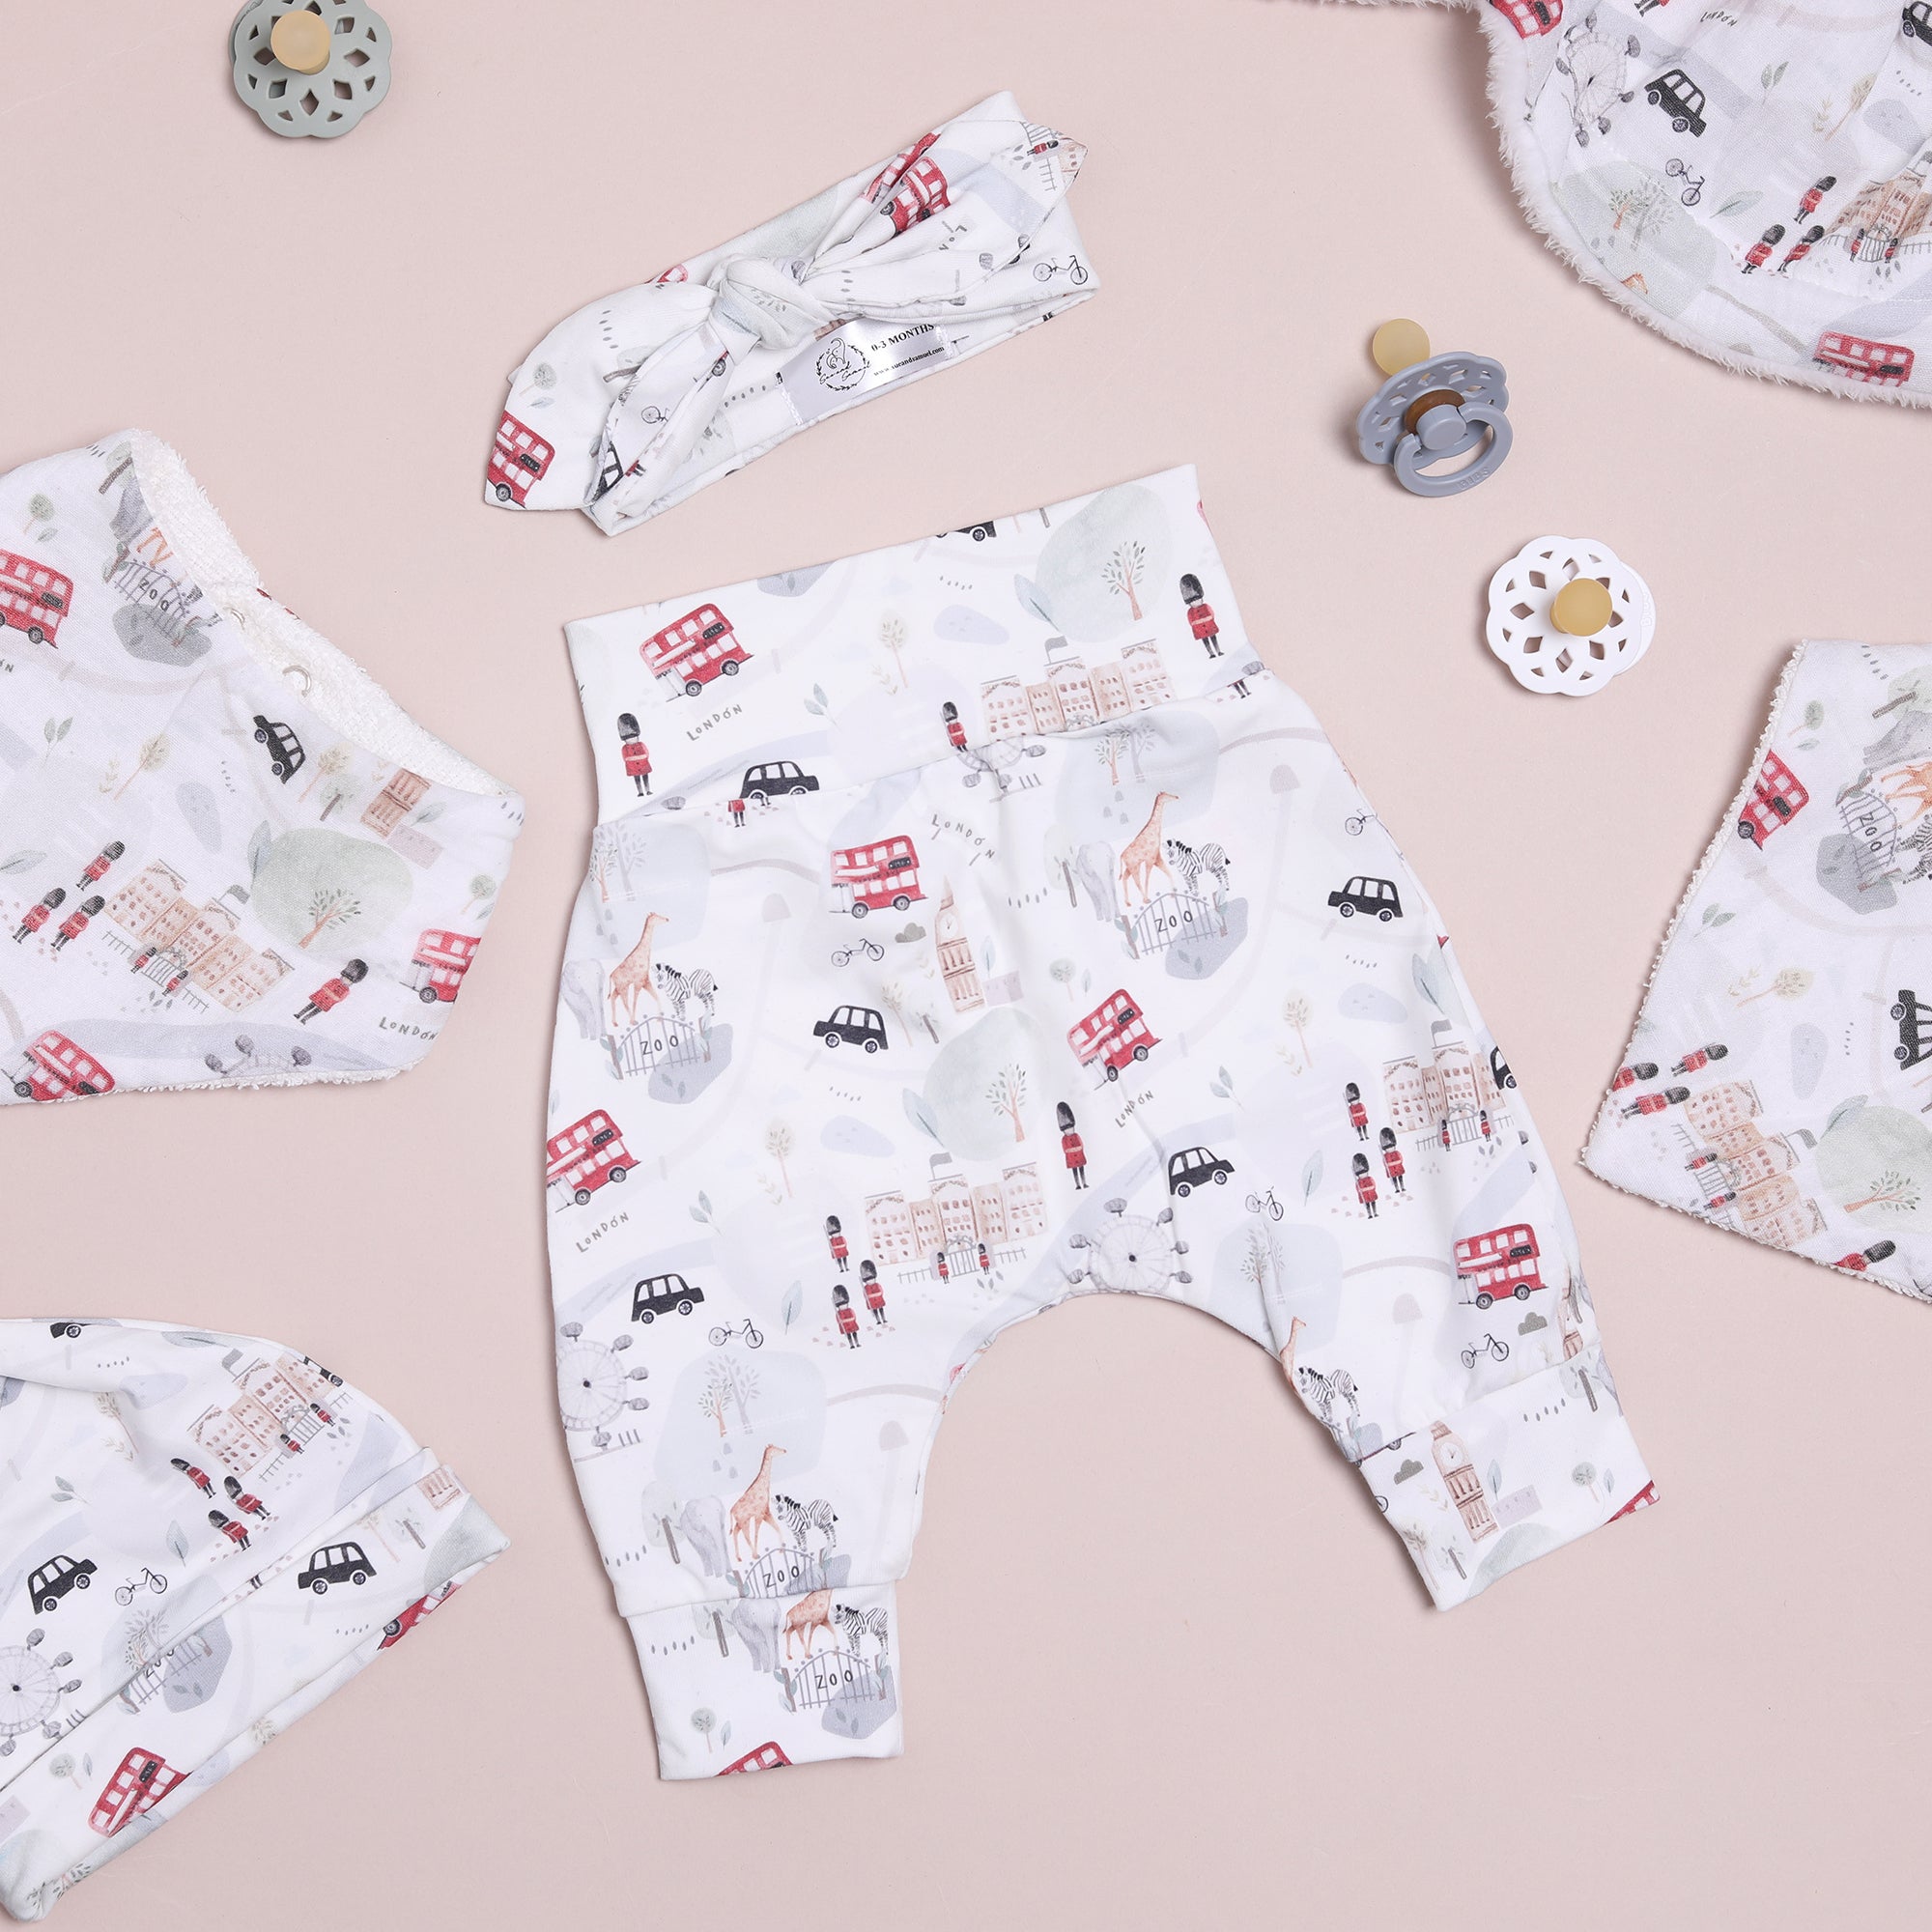 London baby leggings and accessories (Organic) Sue and Samuel